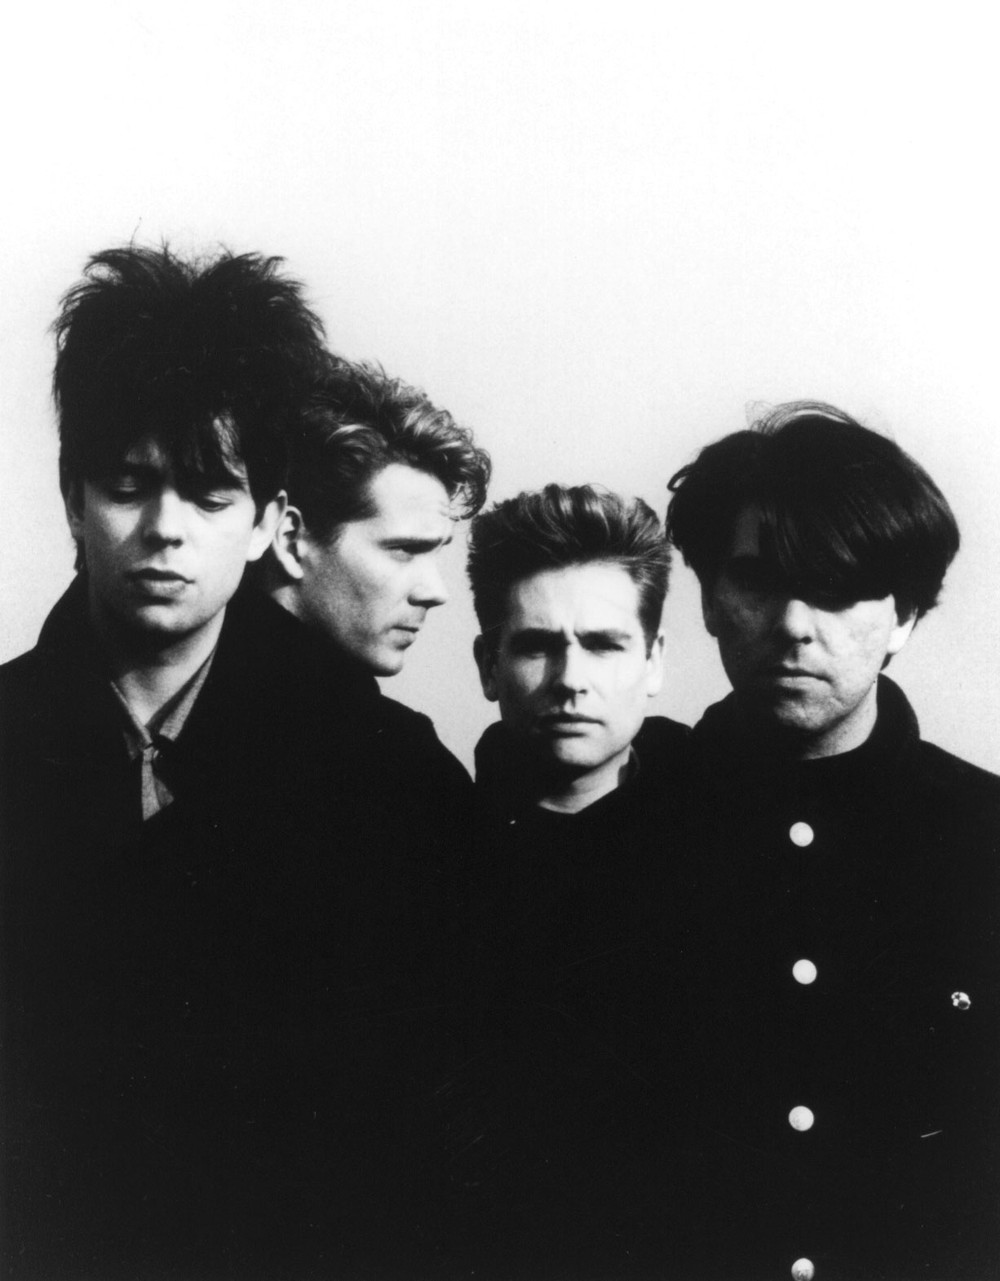 Billets Echo and The Bunnymen: Songs To Learn - Sing (History - Toronto)